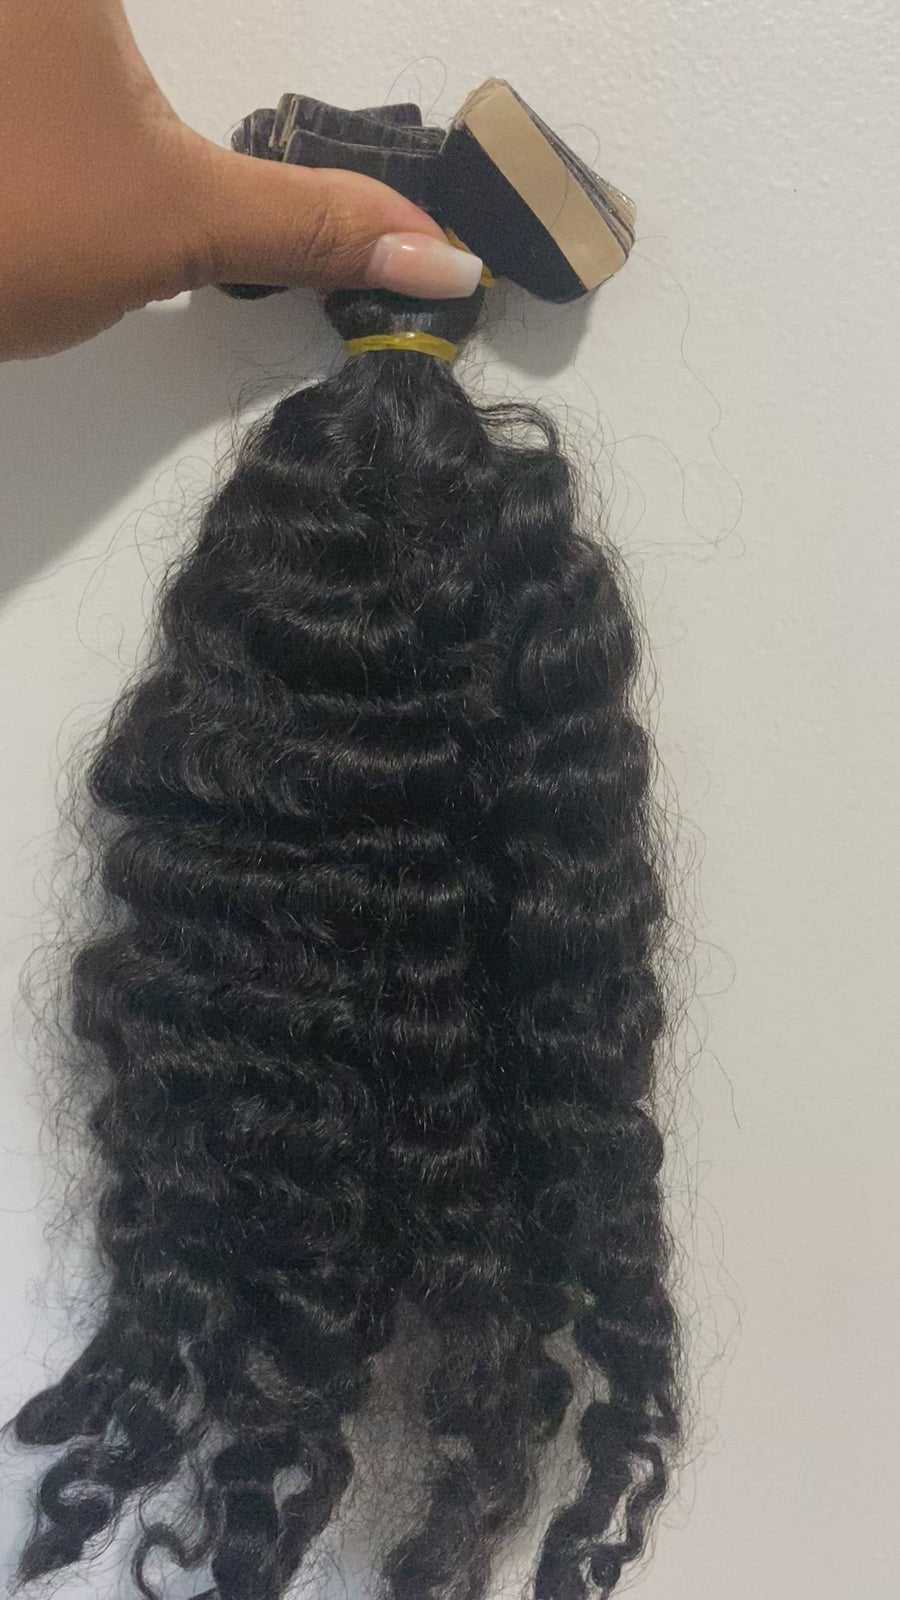 CAMBODIAN TIGHT CURLY TAPE-IN EXTENSIONS